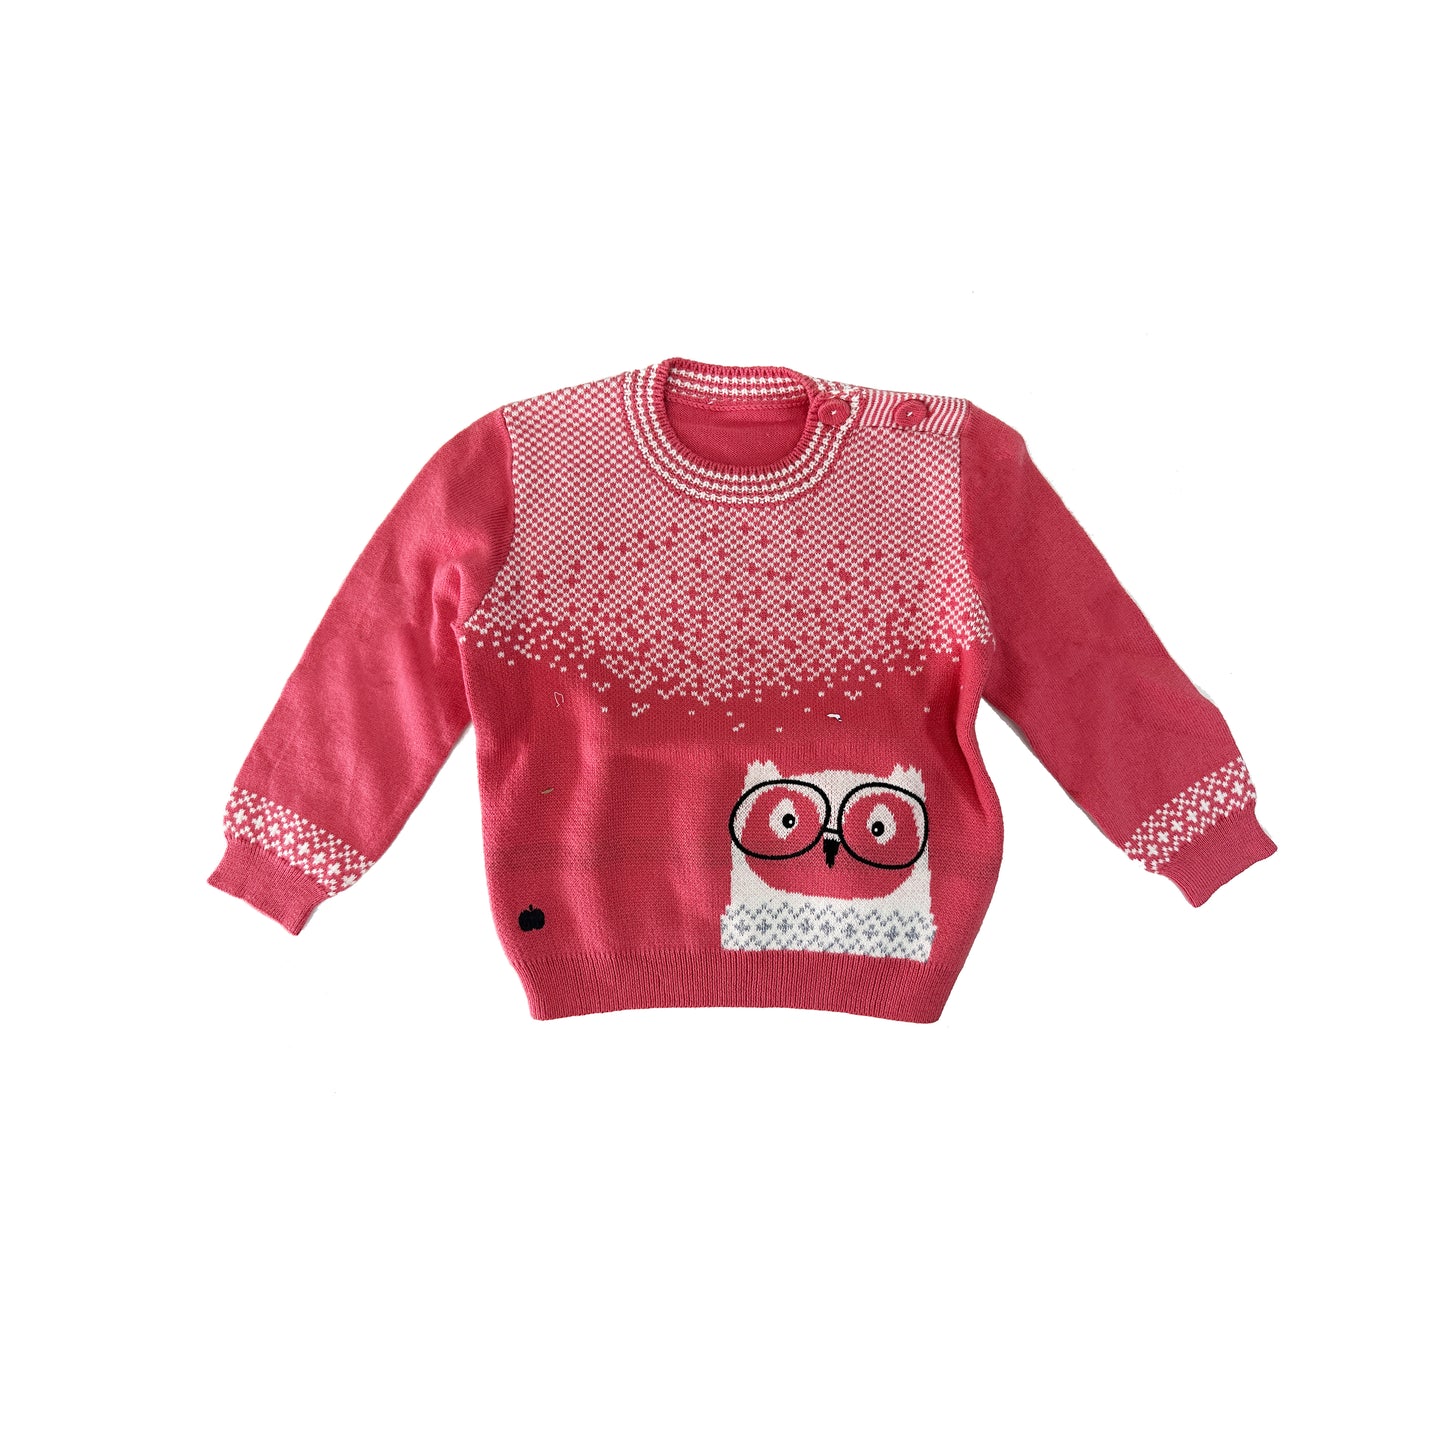 SWEATER - BABY - 2 COLOR (TEAL/PINK) - BBA15 088